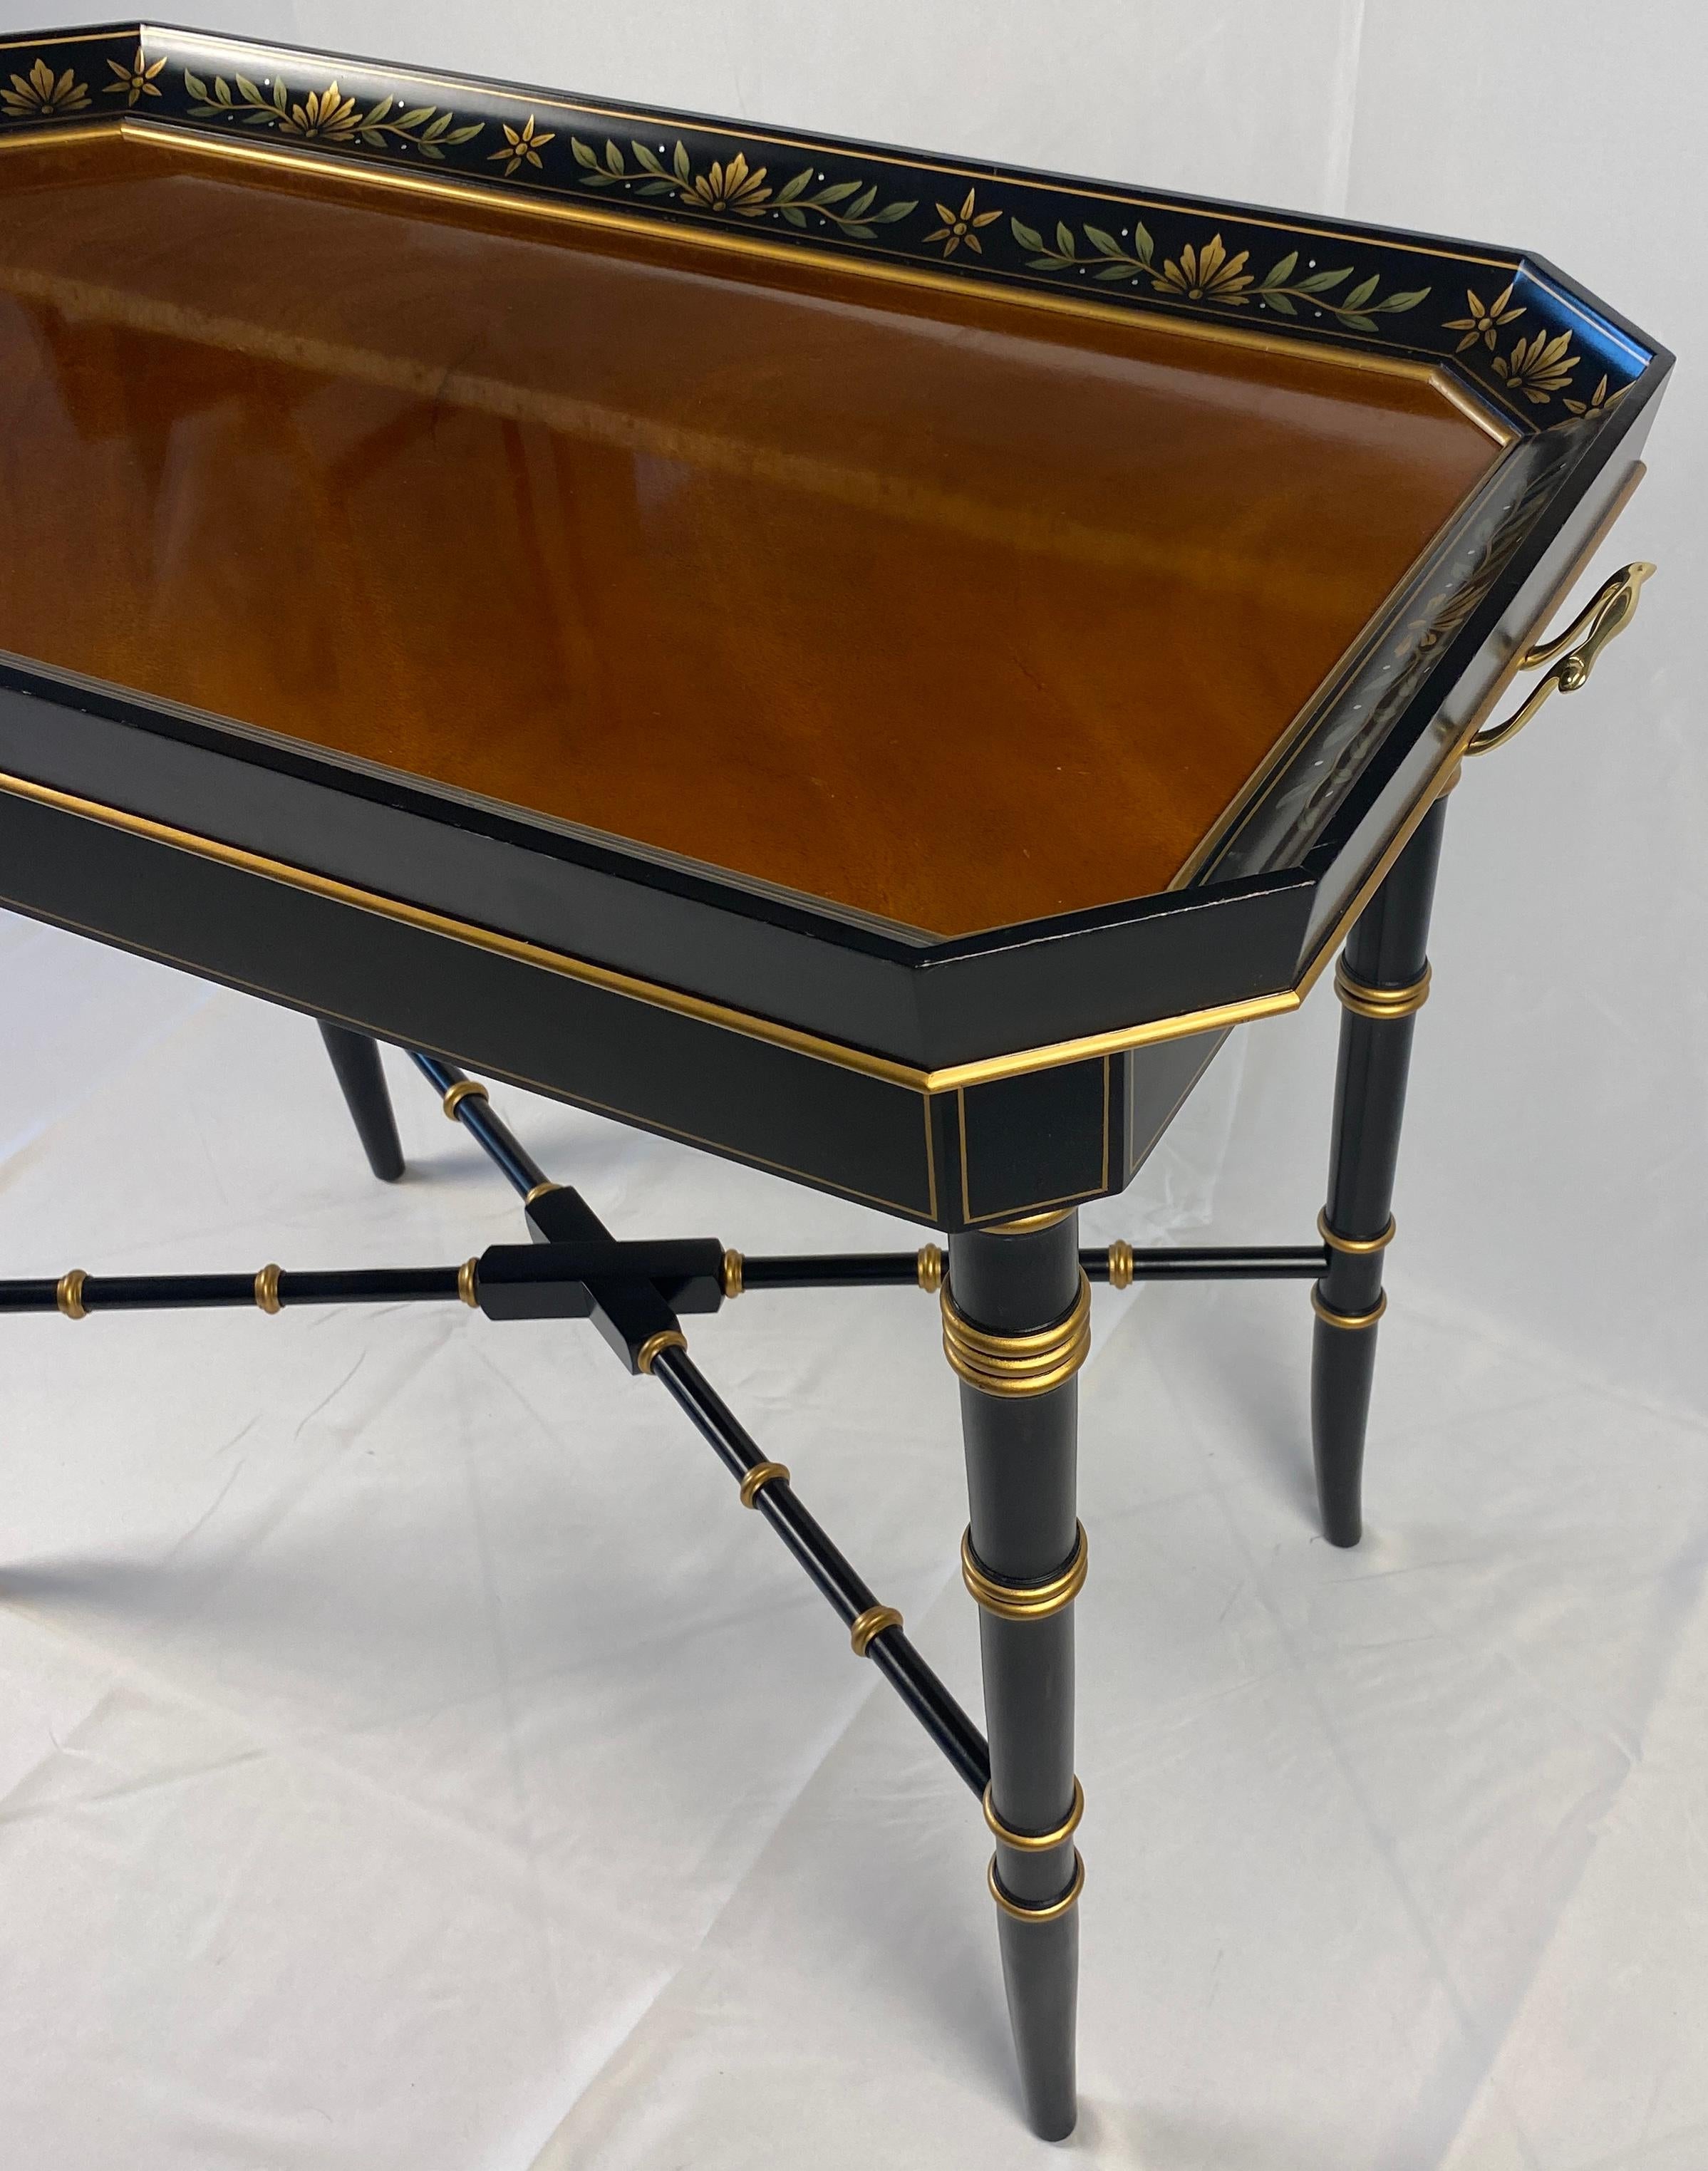 Black and Gold Wooden Tray Table Bamboo Style Legs For Sale 3